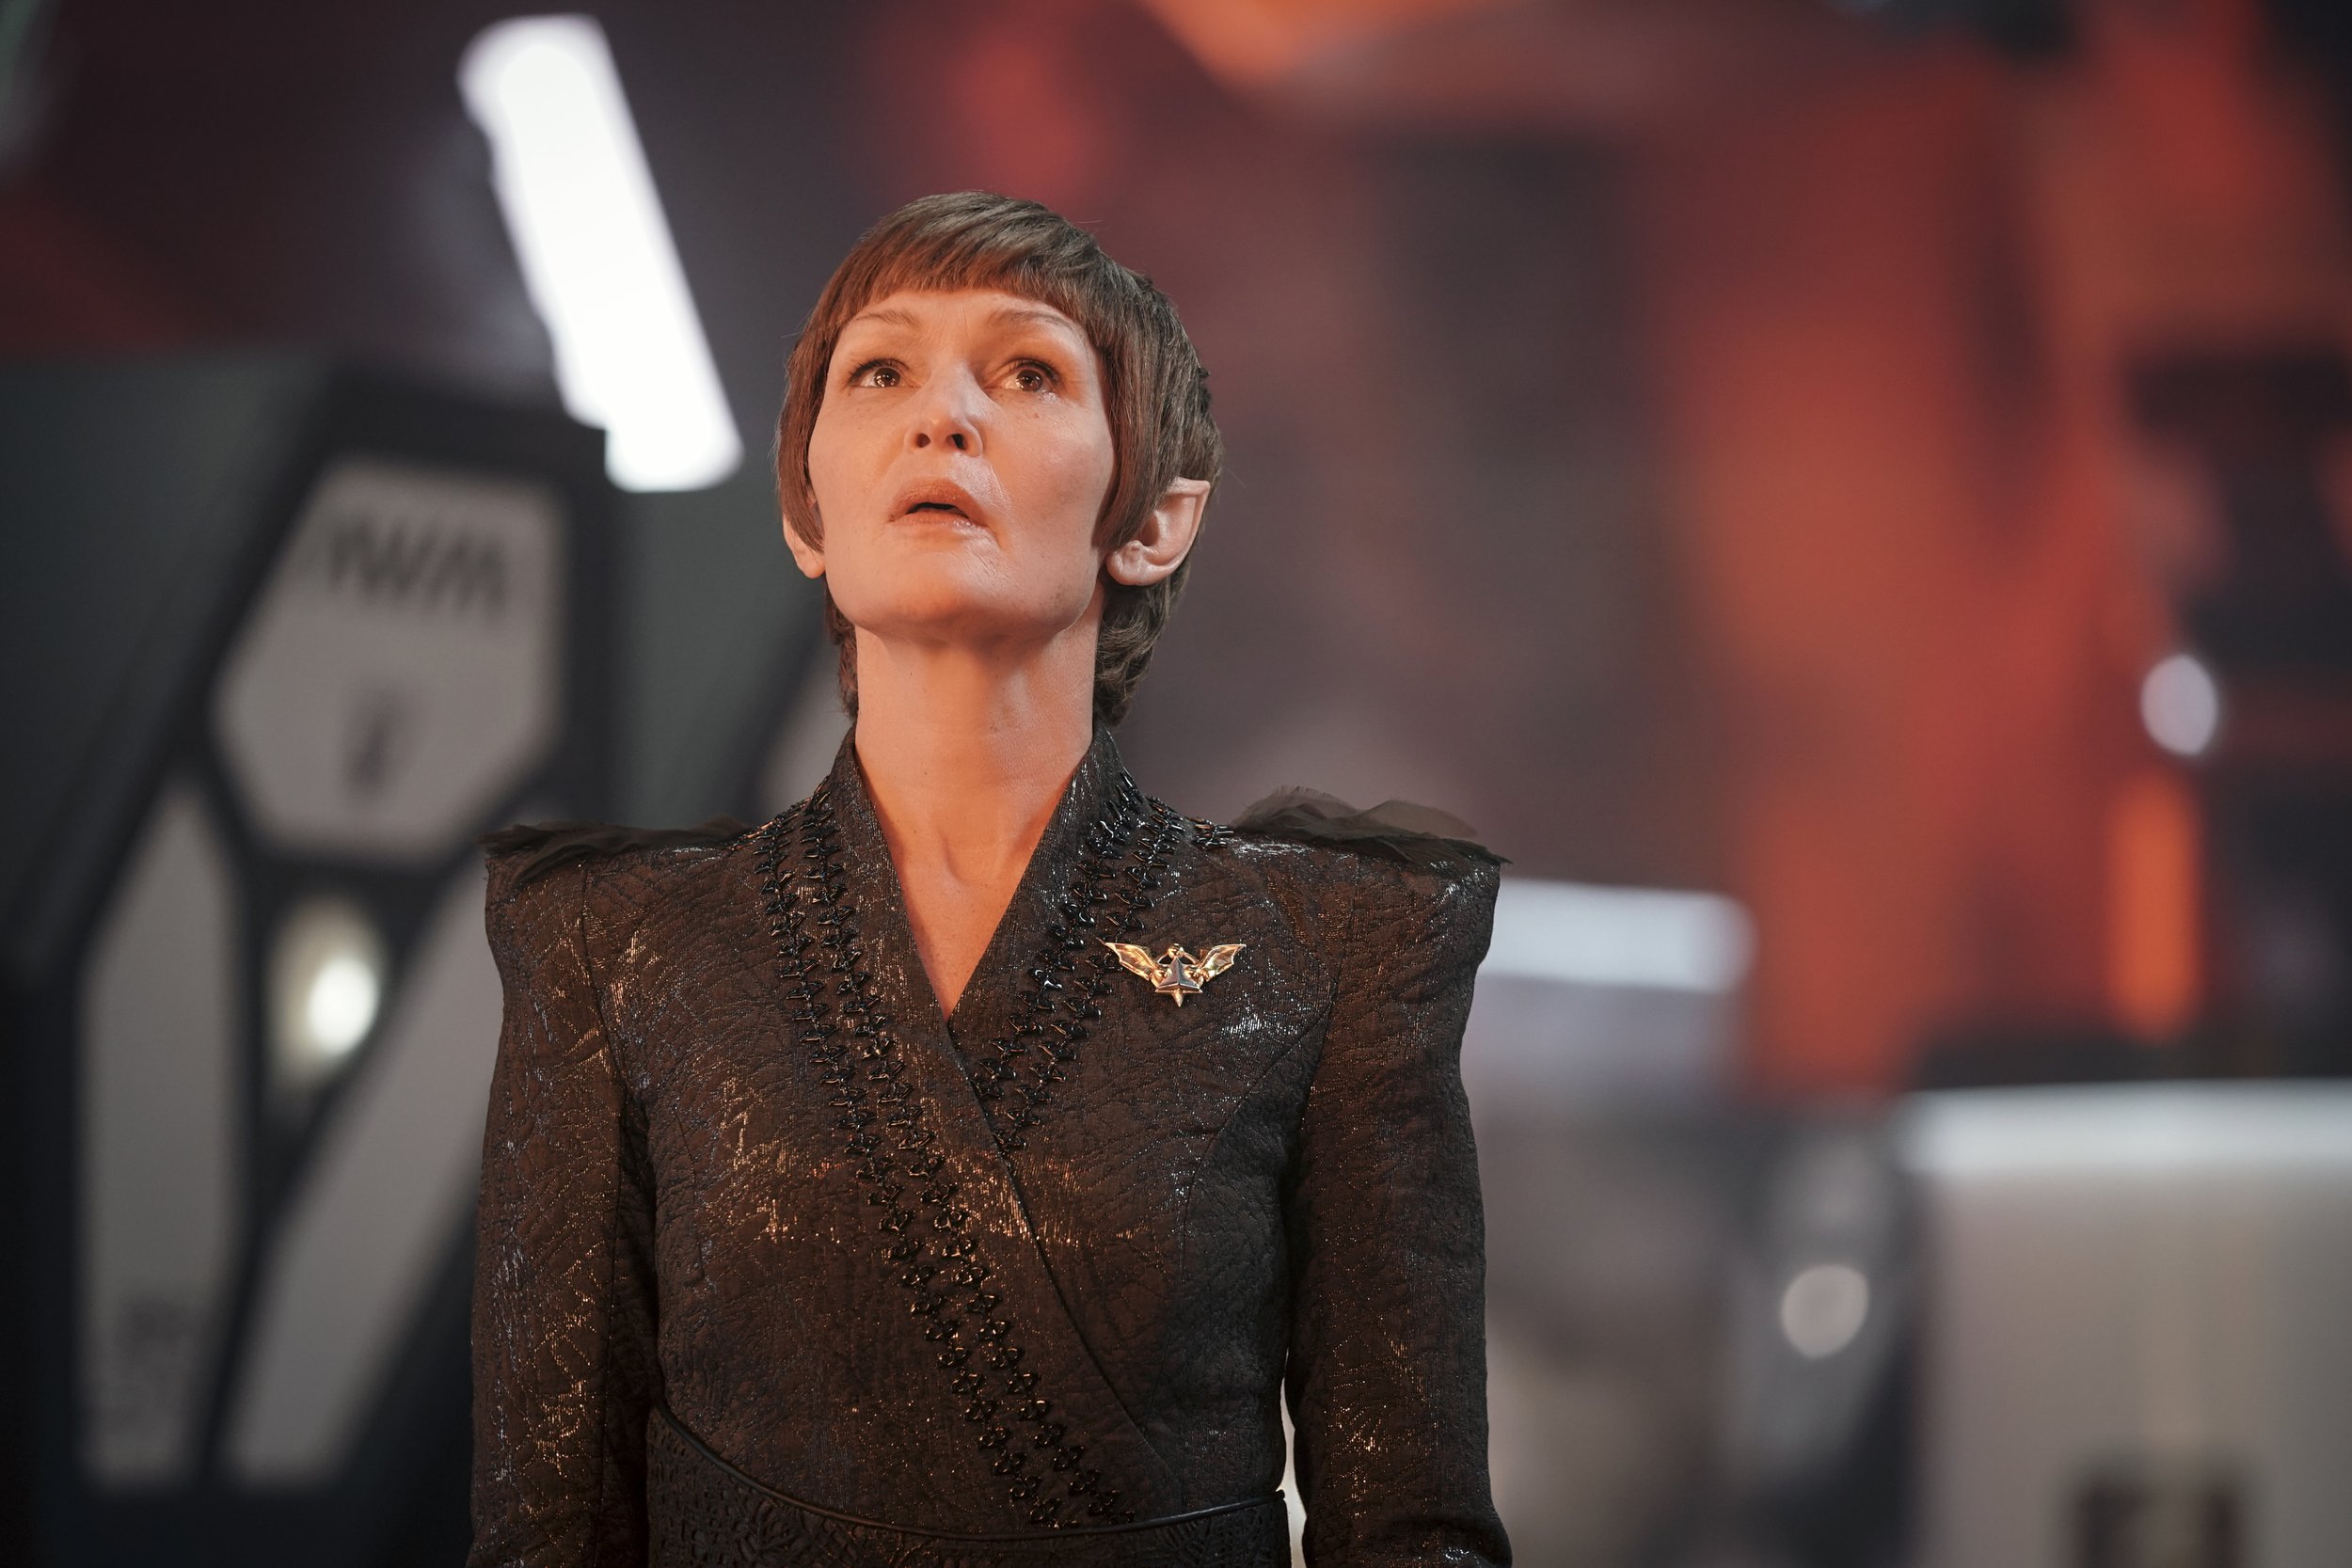   Pictured: Tara Rosling as T’Rina of the Paramount+ original series STAR TREK: DISCOVERY. Photo Cr: Marni Grossman/Paramount+ © 2021 CBS Interactive. All Rights Reserved.  